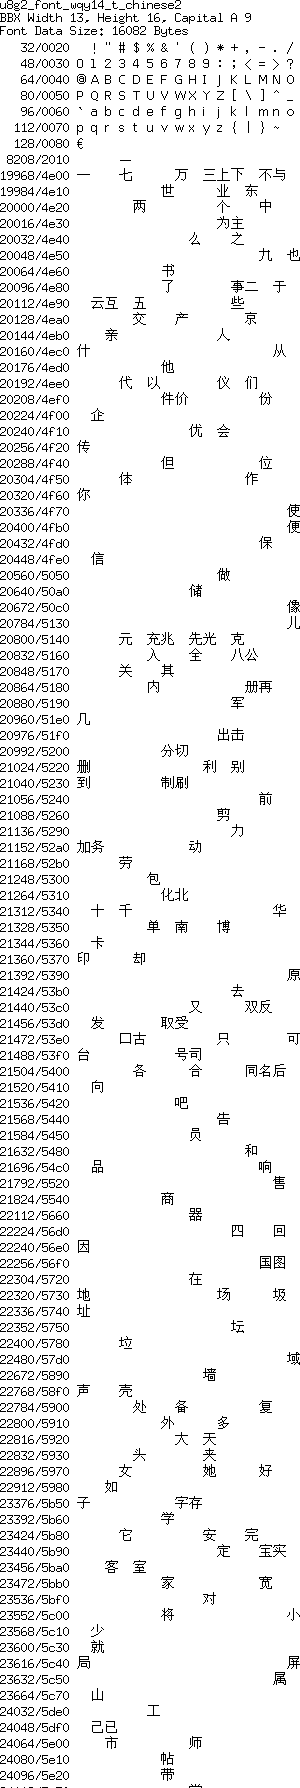 fntpic/u8g2_font_wqy14_t_chinese2.png